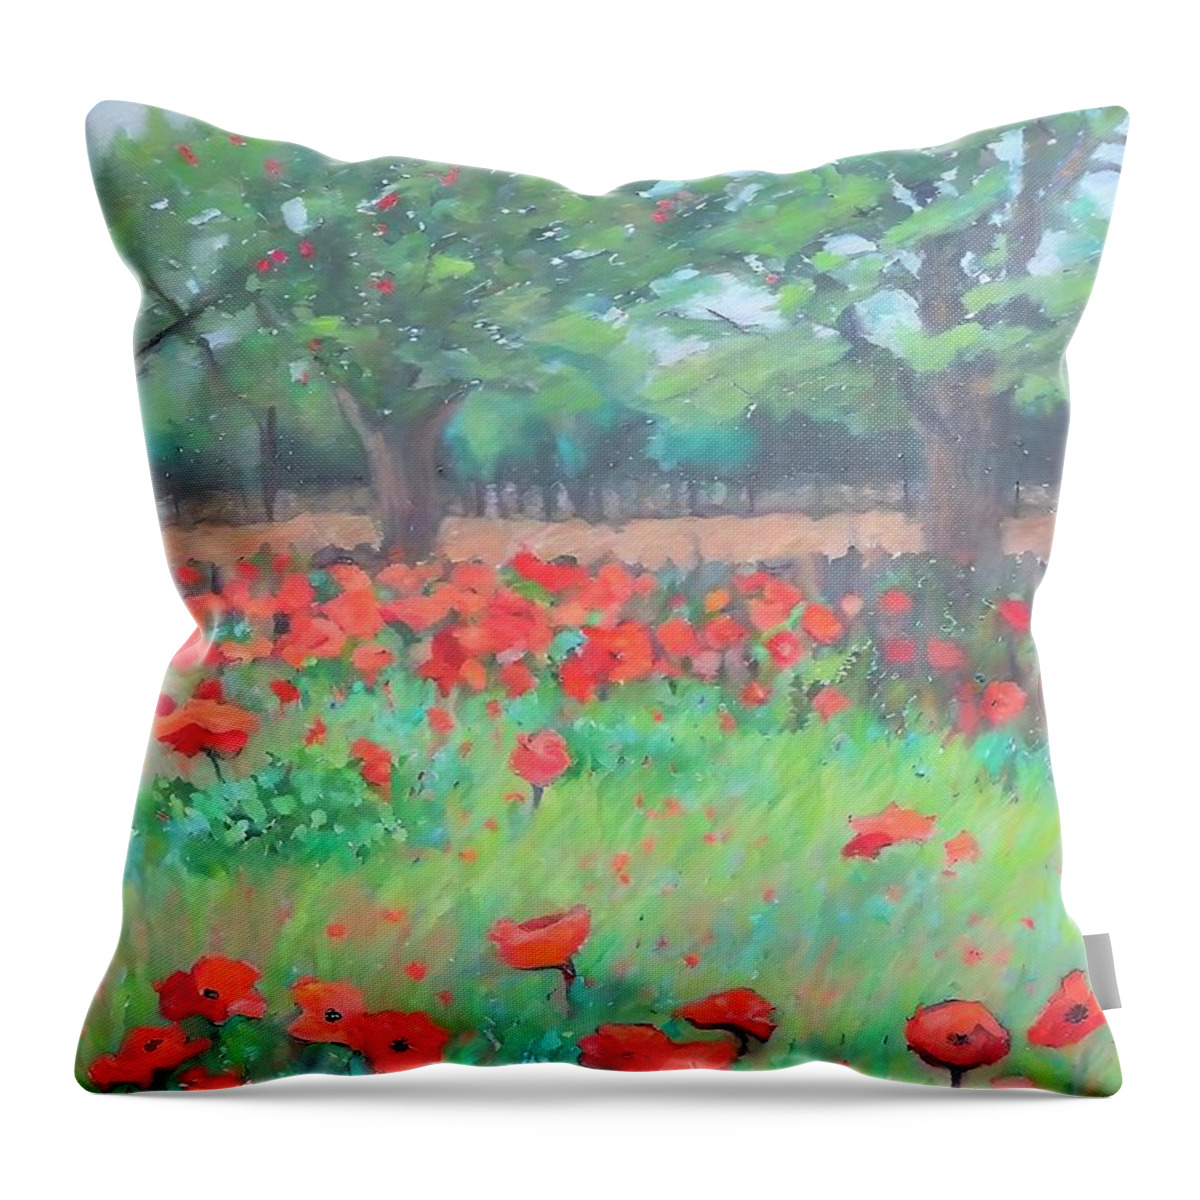 Poppies Throw Pillow featuring the painting June Painting poppies summer trees oilpainting flowers poppy field grass landscape nature original acryl agriculture aqua aquarelle art artistic background beautiful bloom blossom brandenburg canvas by N Akkash